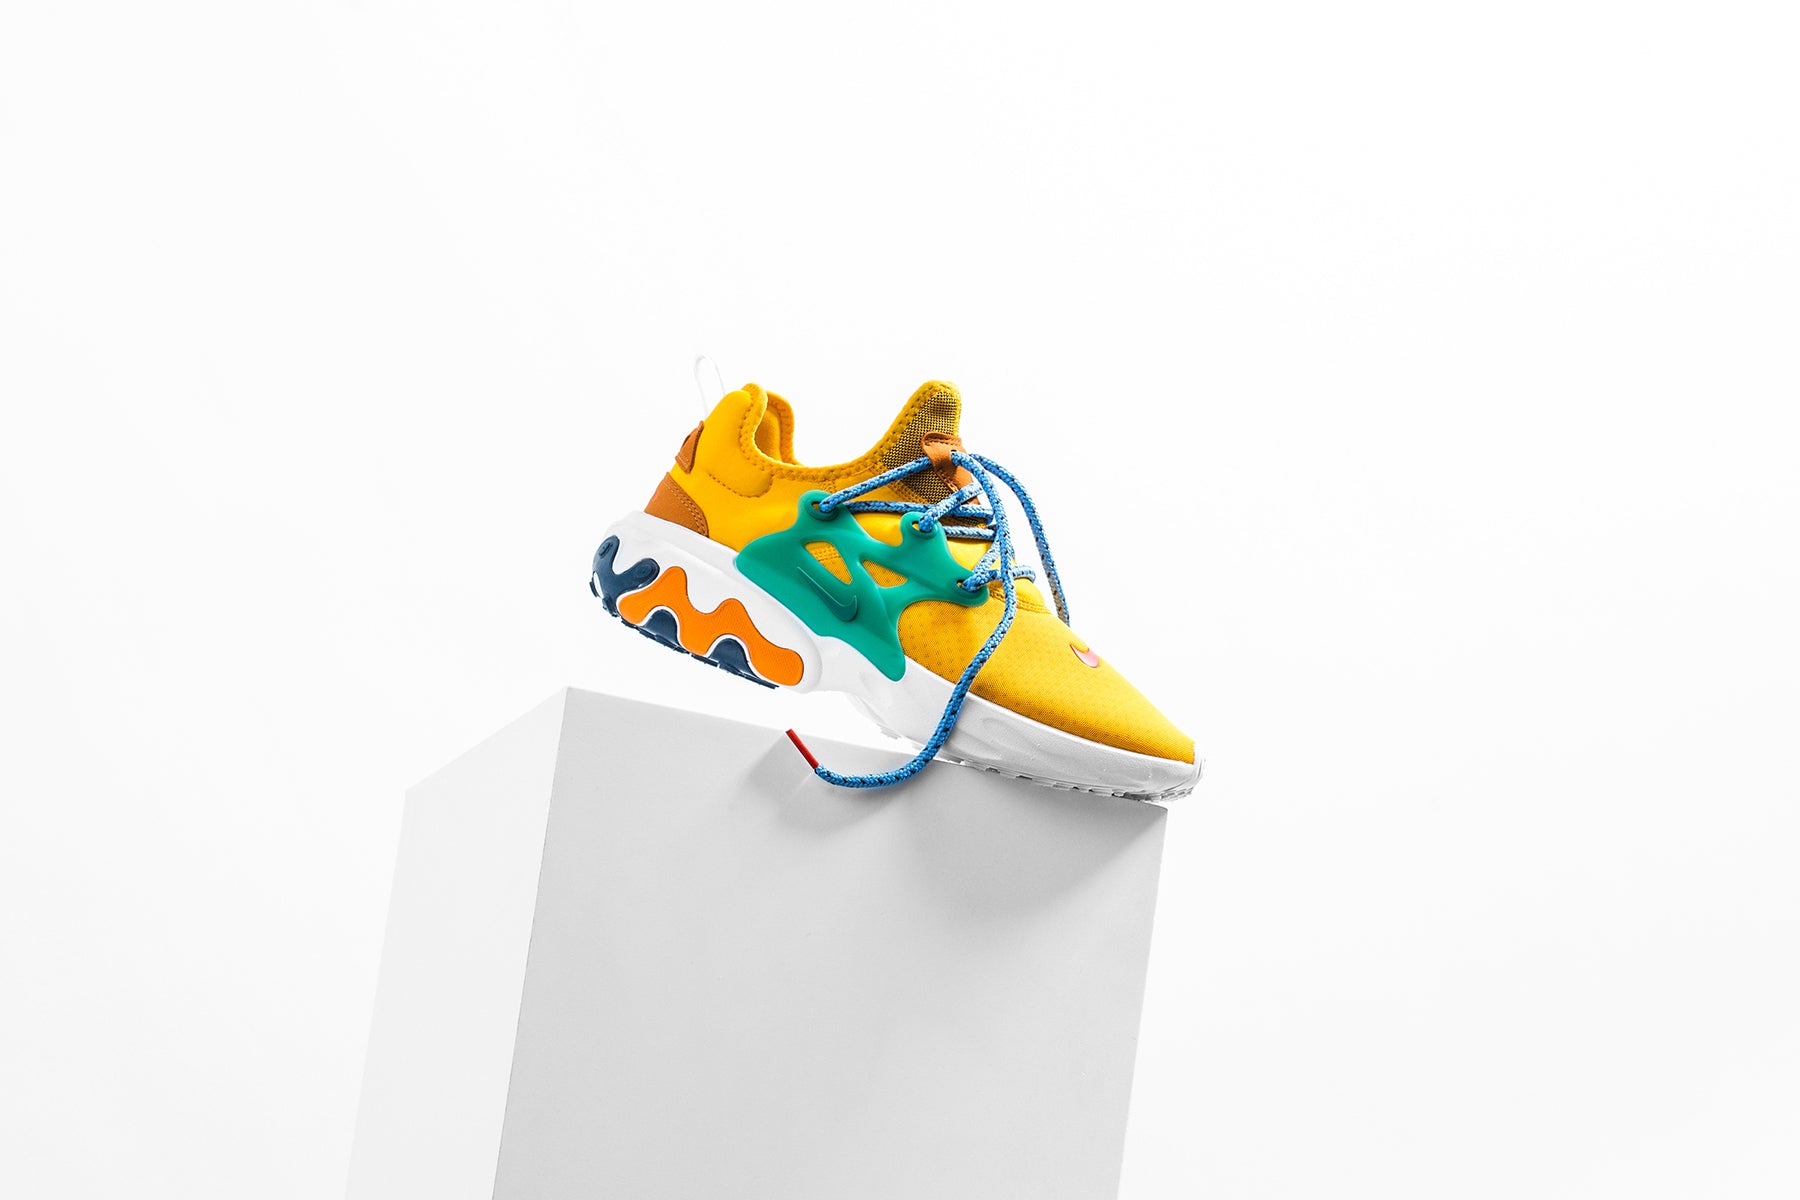 Nike React Presto "University Gold/Habanero Red" Available Now Feature